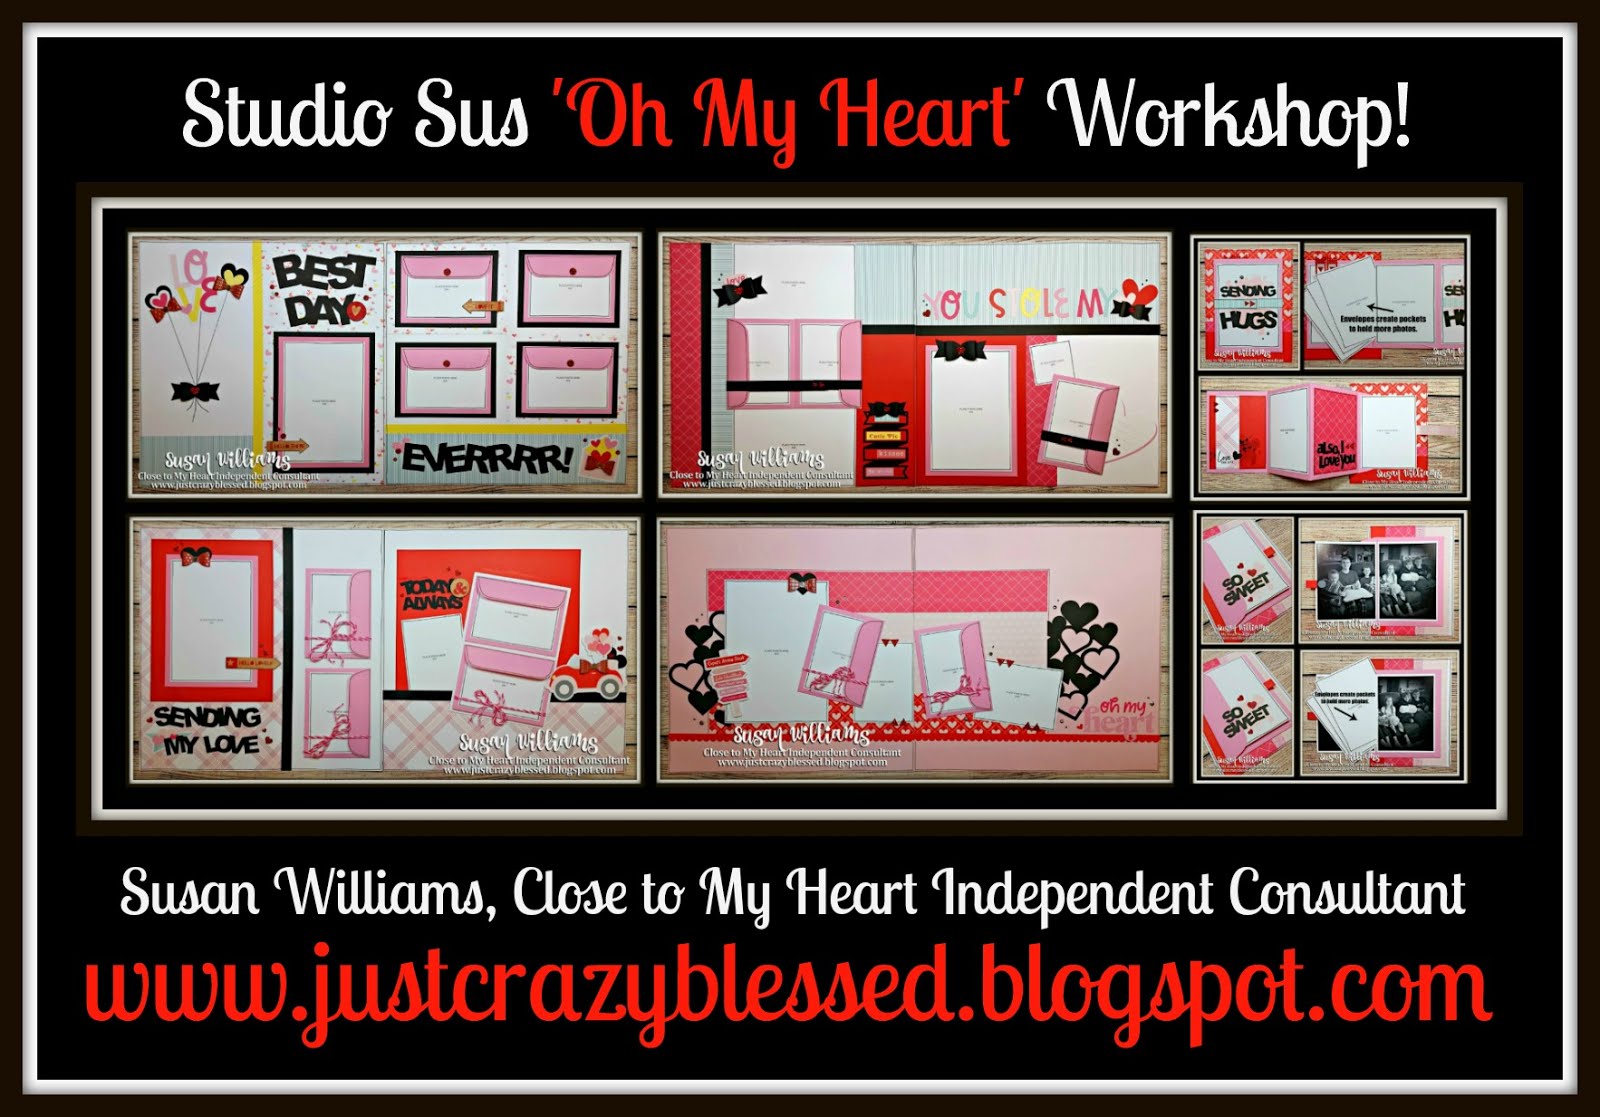 'Oh My Heart' Workshop!